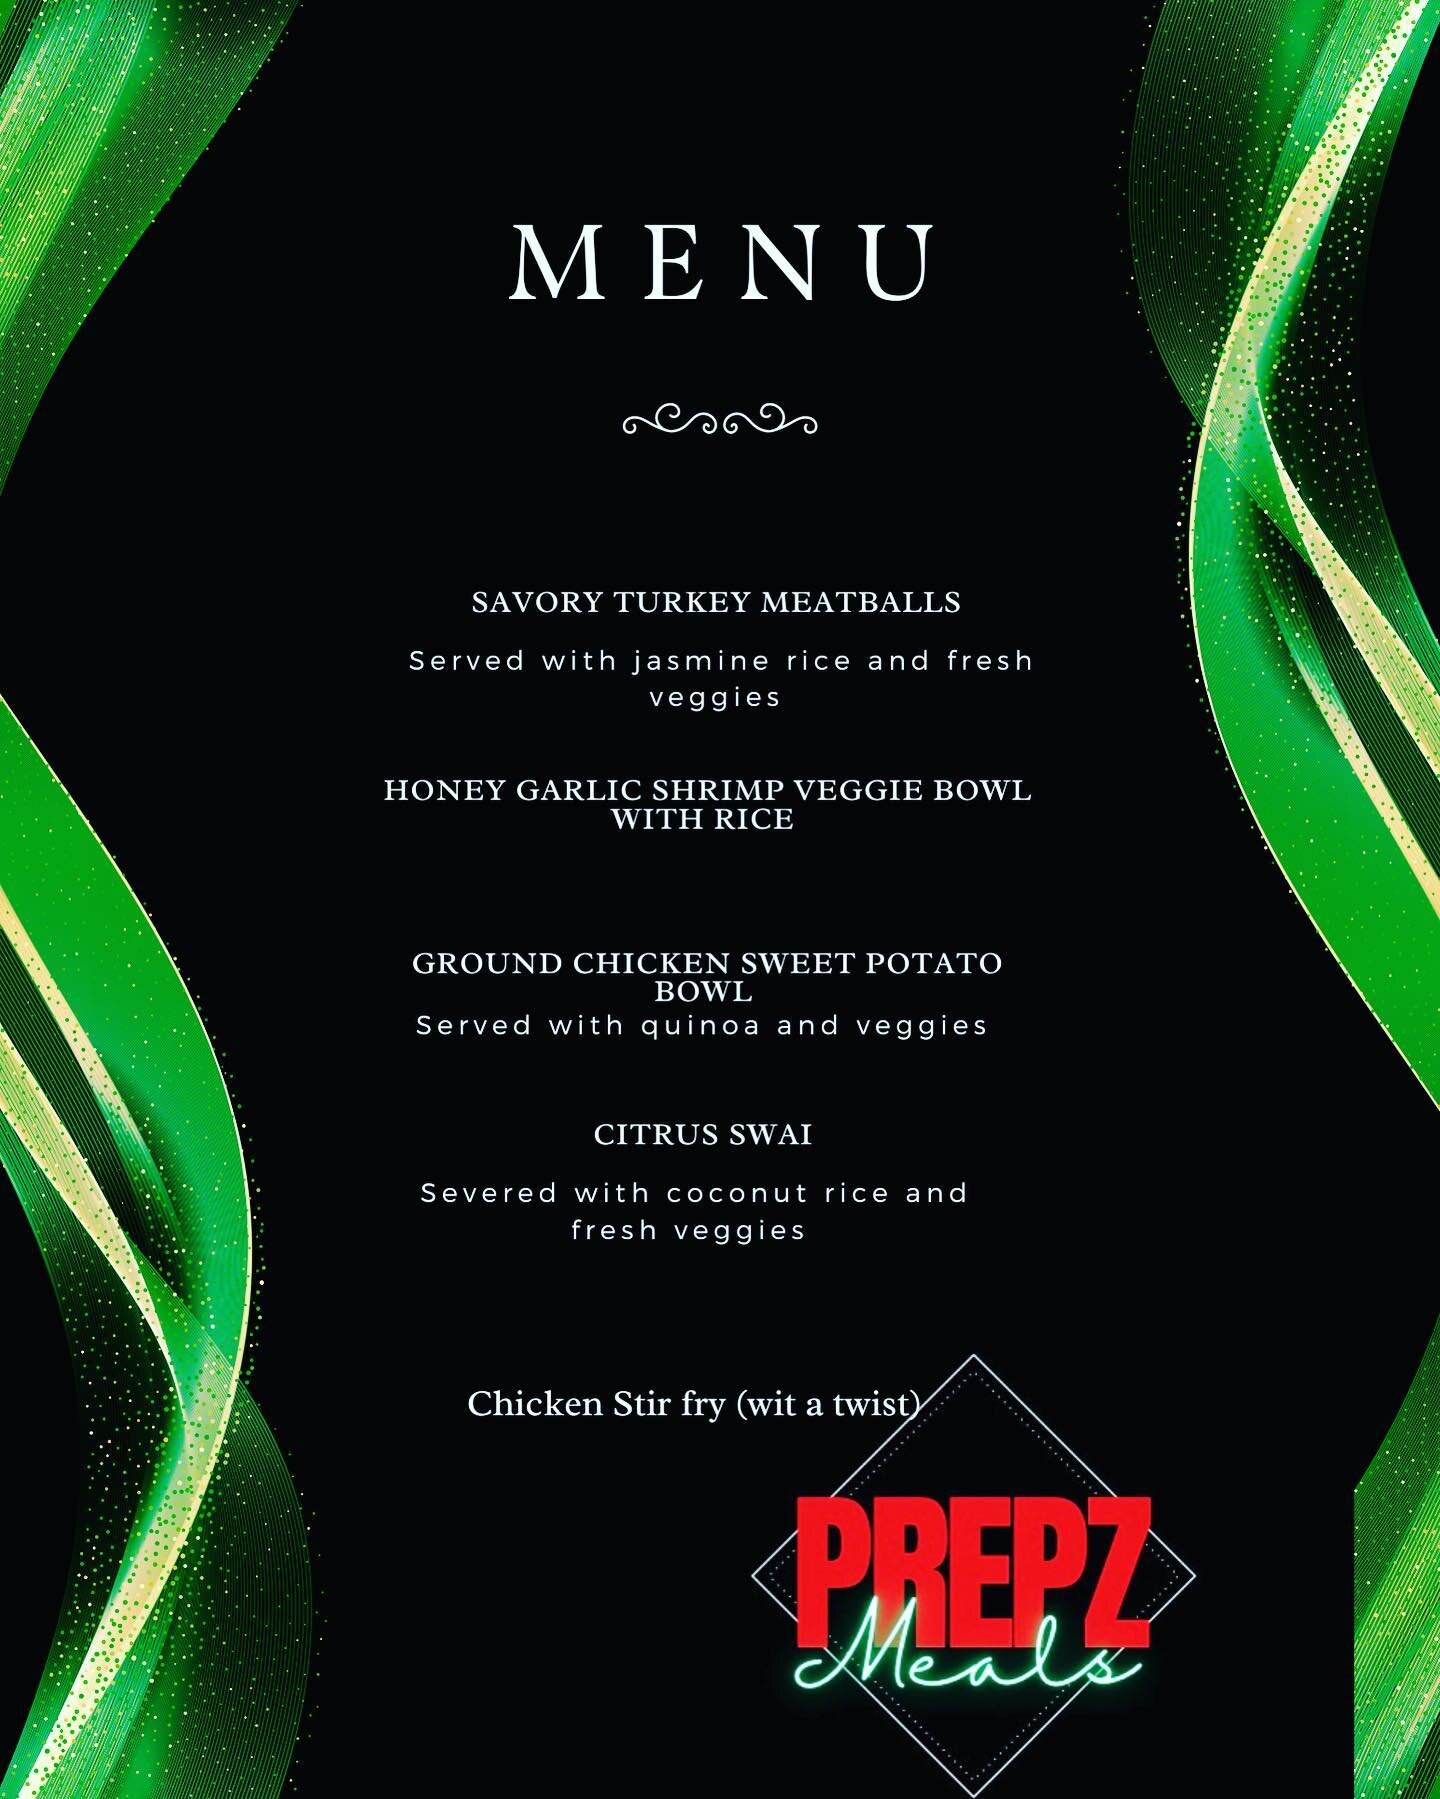 Here&rsquo;s the menu for this upcoming week 🤪🤪🤪 Remember orders need to be in Friday by 9pm&hellip;. If you like delivery it&rsquo;s only $20 😉😉😃😃Happy Hump day&hellip;
#prepzmeals#food#cleanfood#cleaneats#atlfitness#atlanta#fitnessmotivation